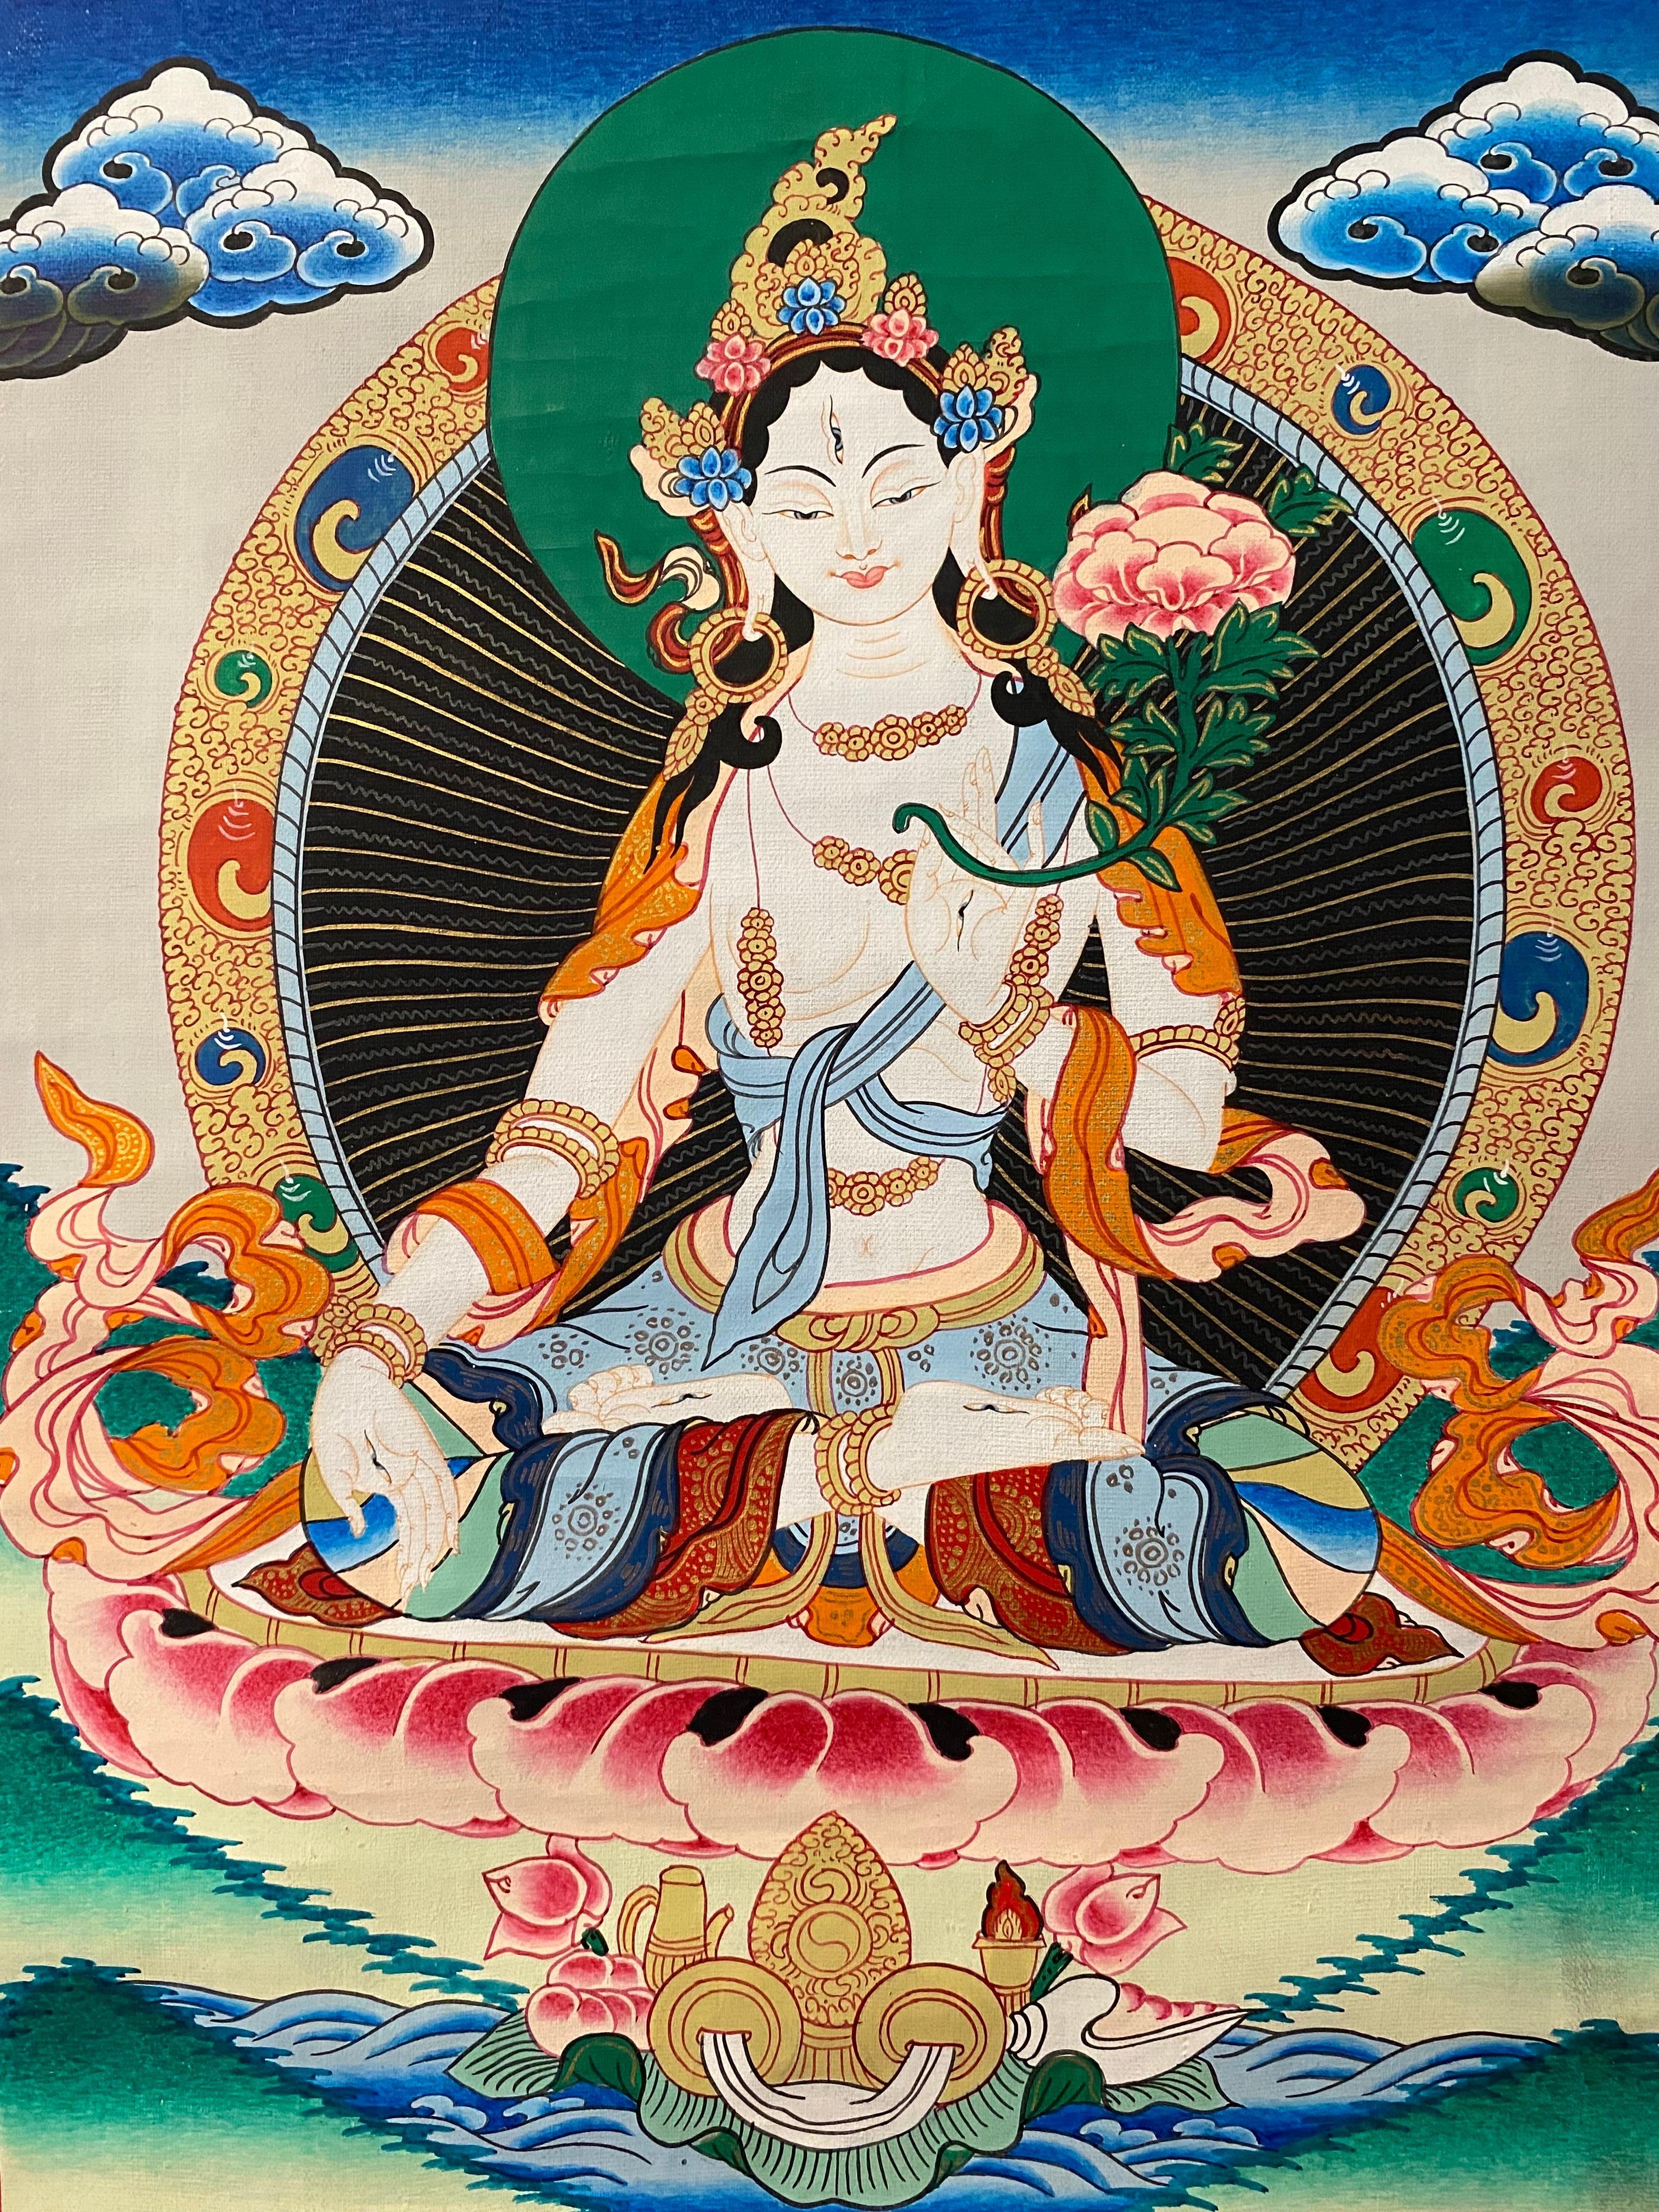 Unframed Hand Painted White Tara Thangka on Canvas 24K Gold - Beige Figurative Painting by Unknown